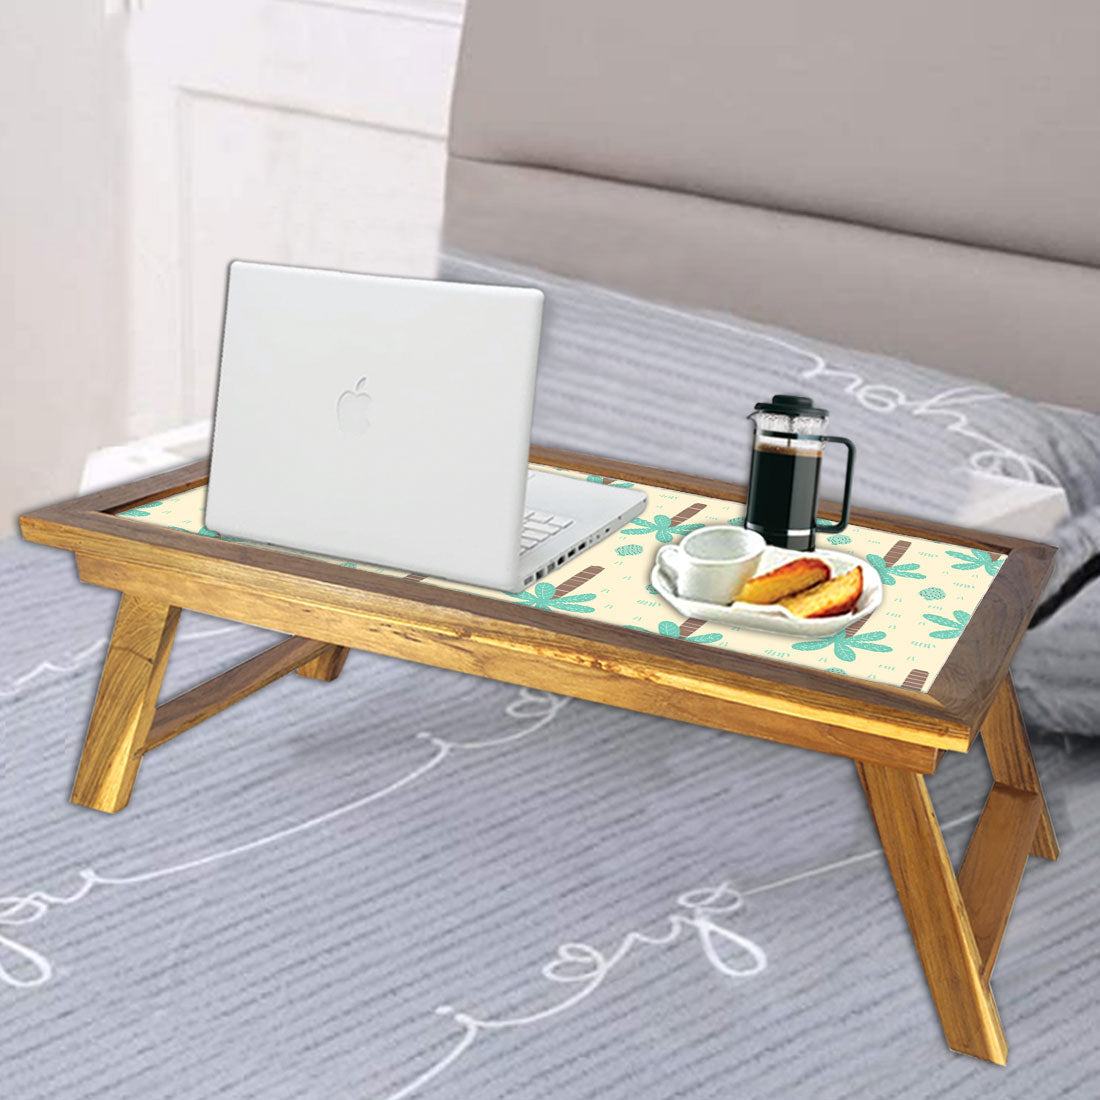 Small Table Breakfast in Bed Study Desk Laptop Tray for Home - Palm Tree Nutcase